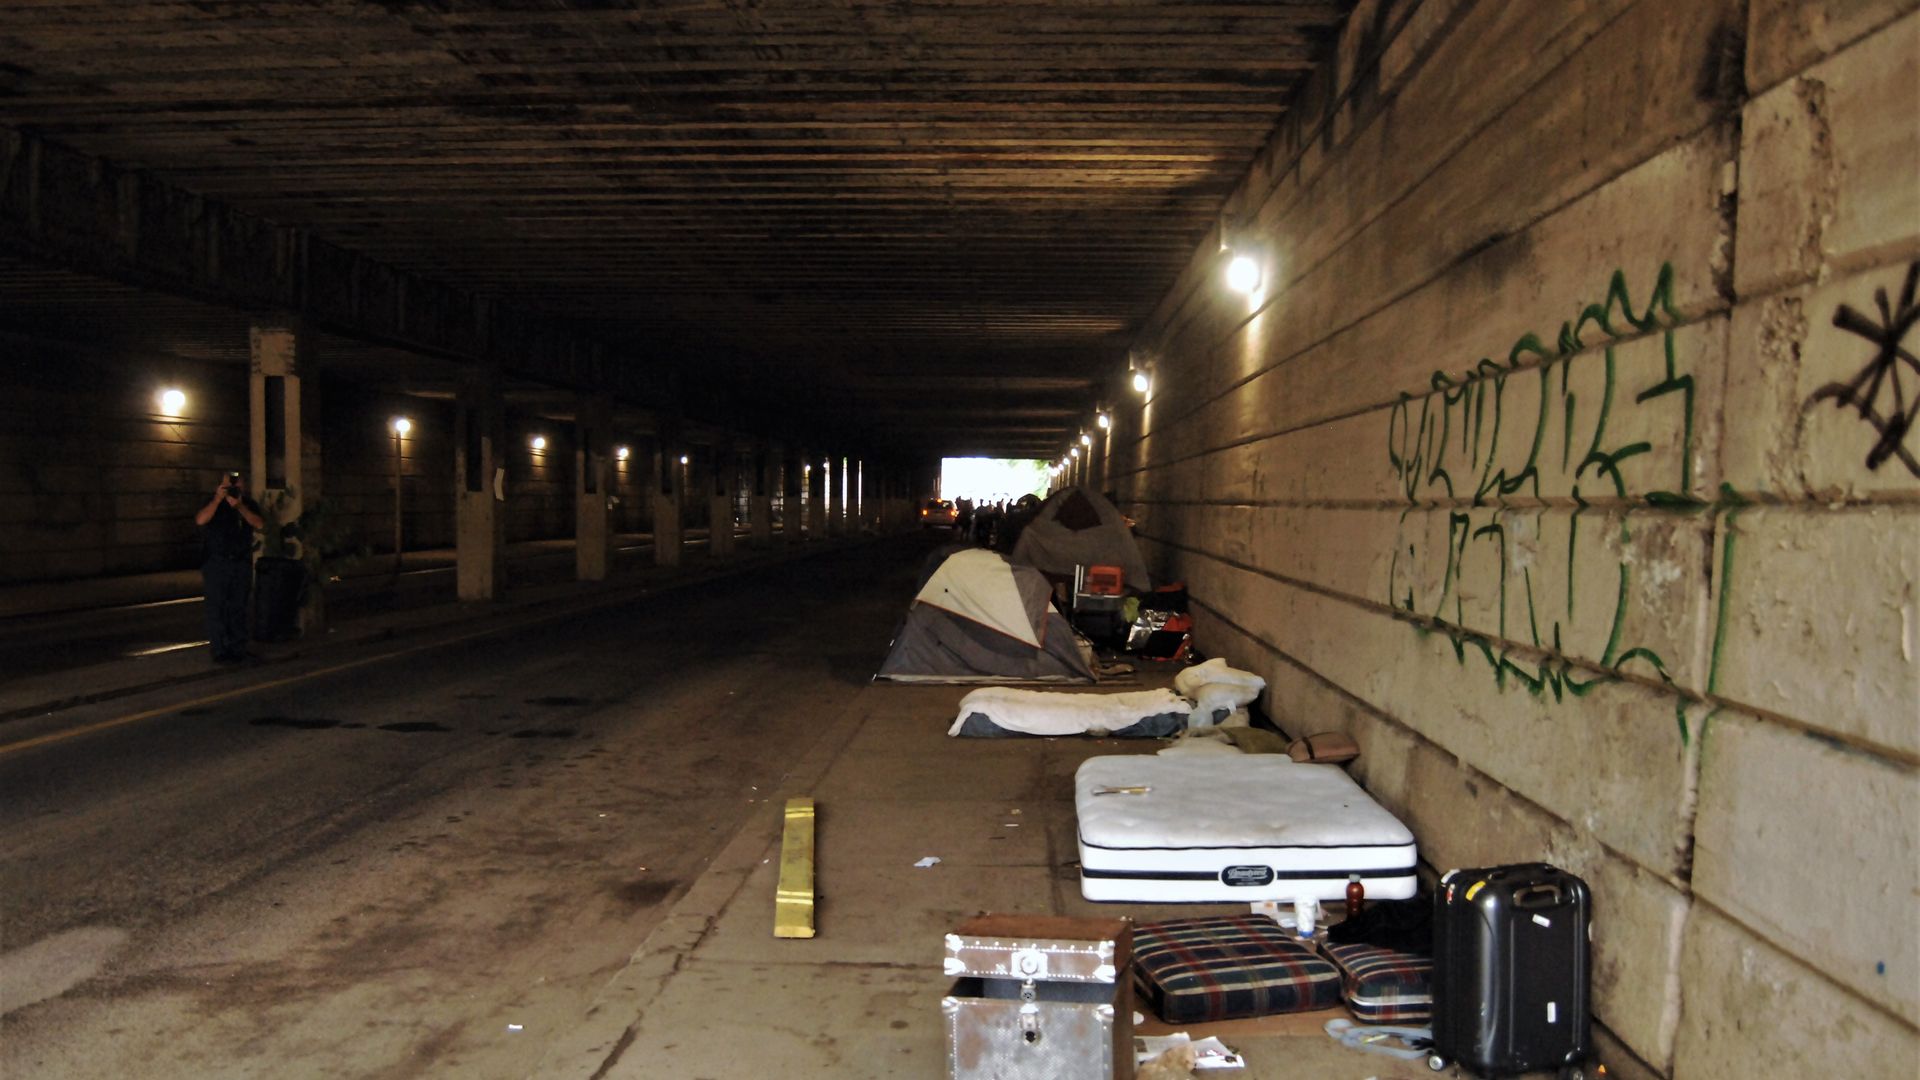 Makeshift beds for homeless people under a highway